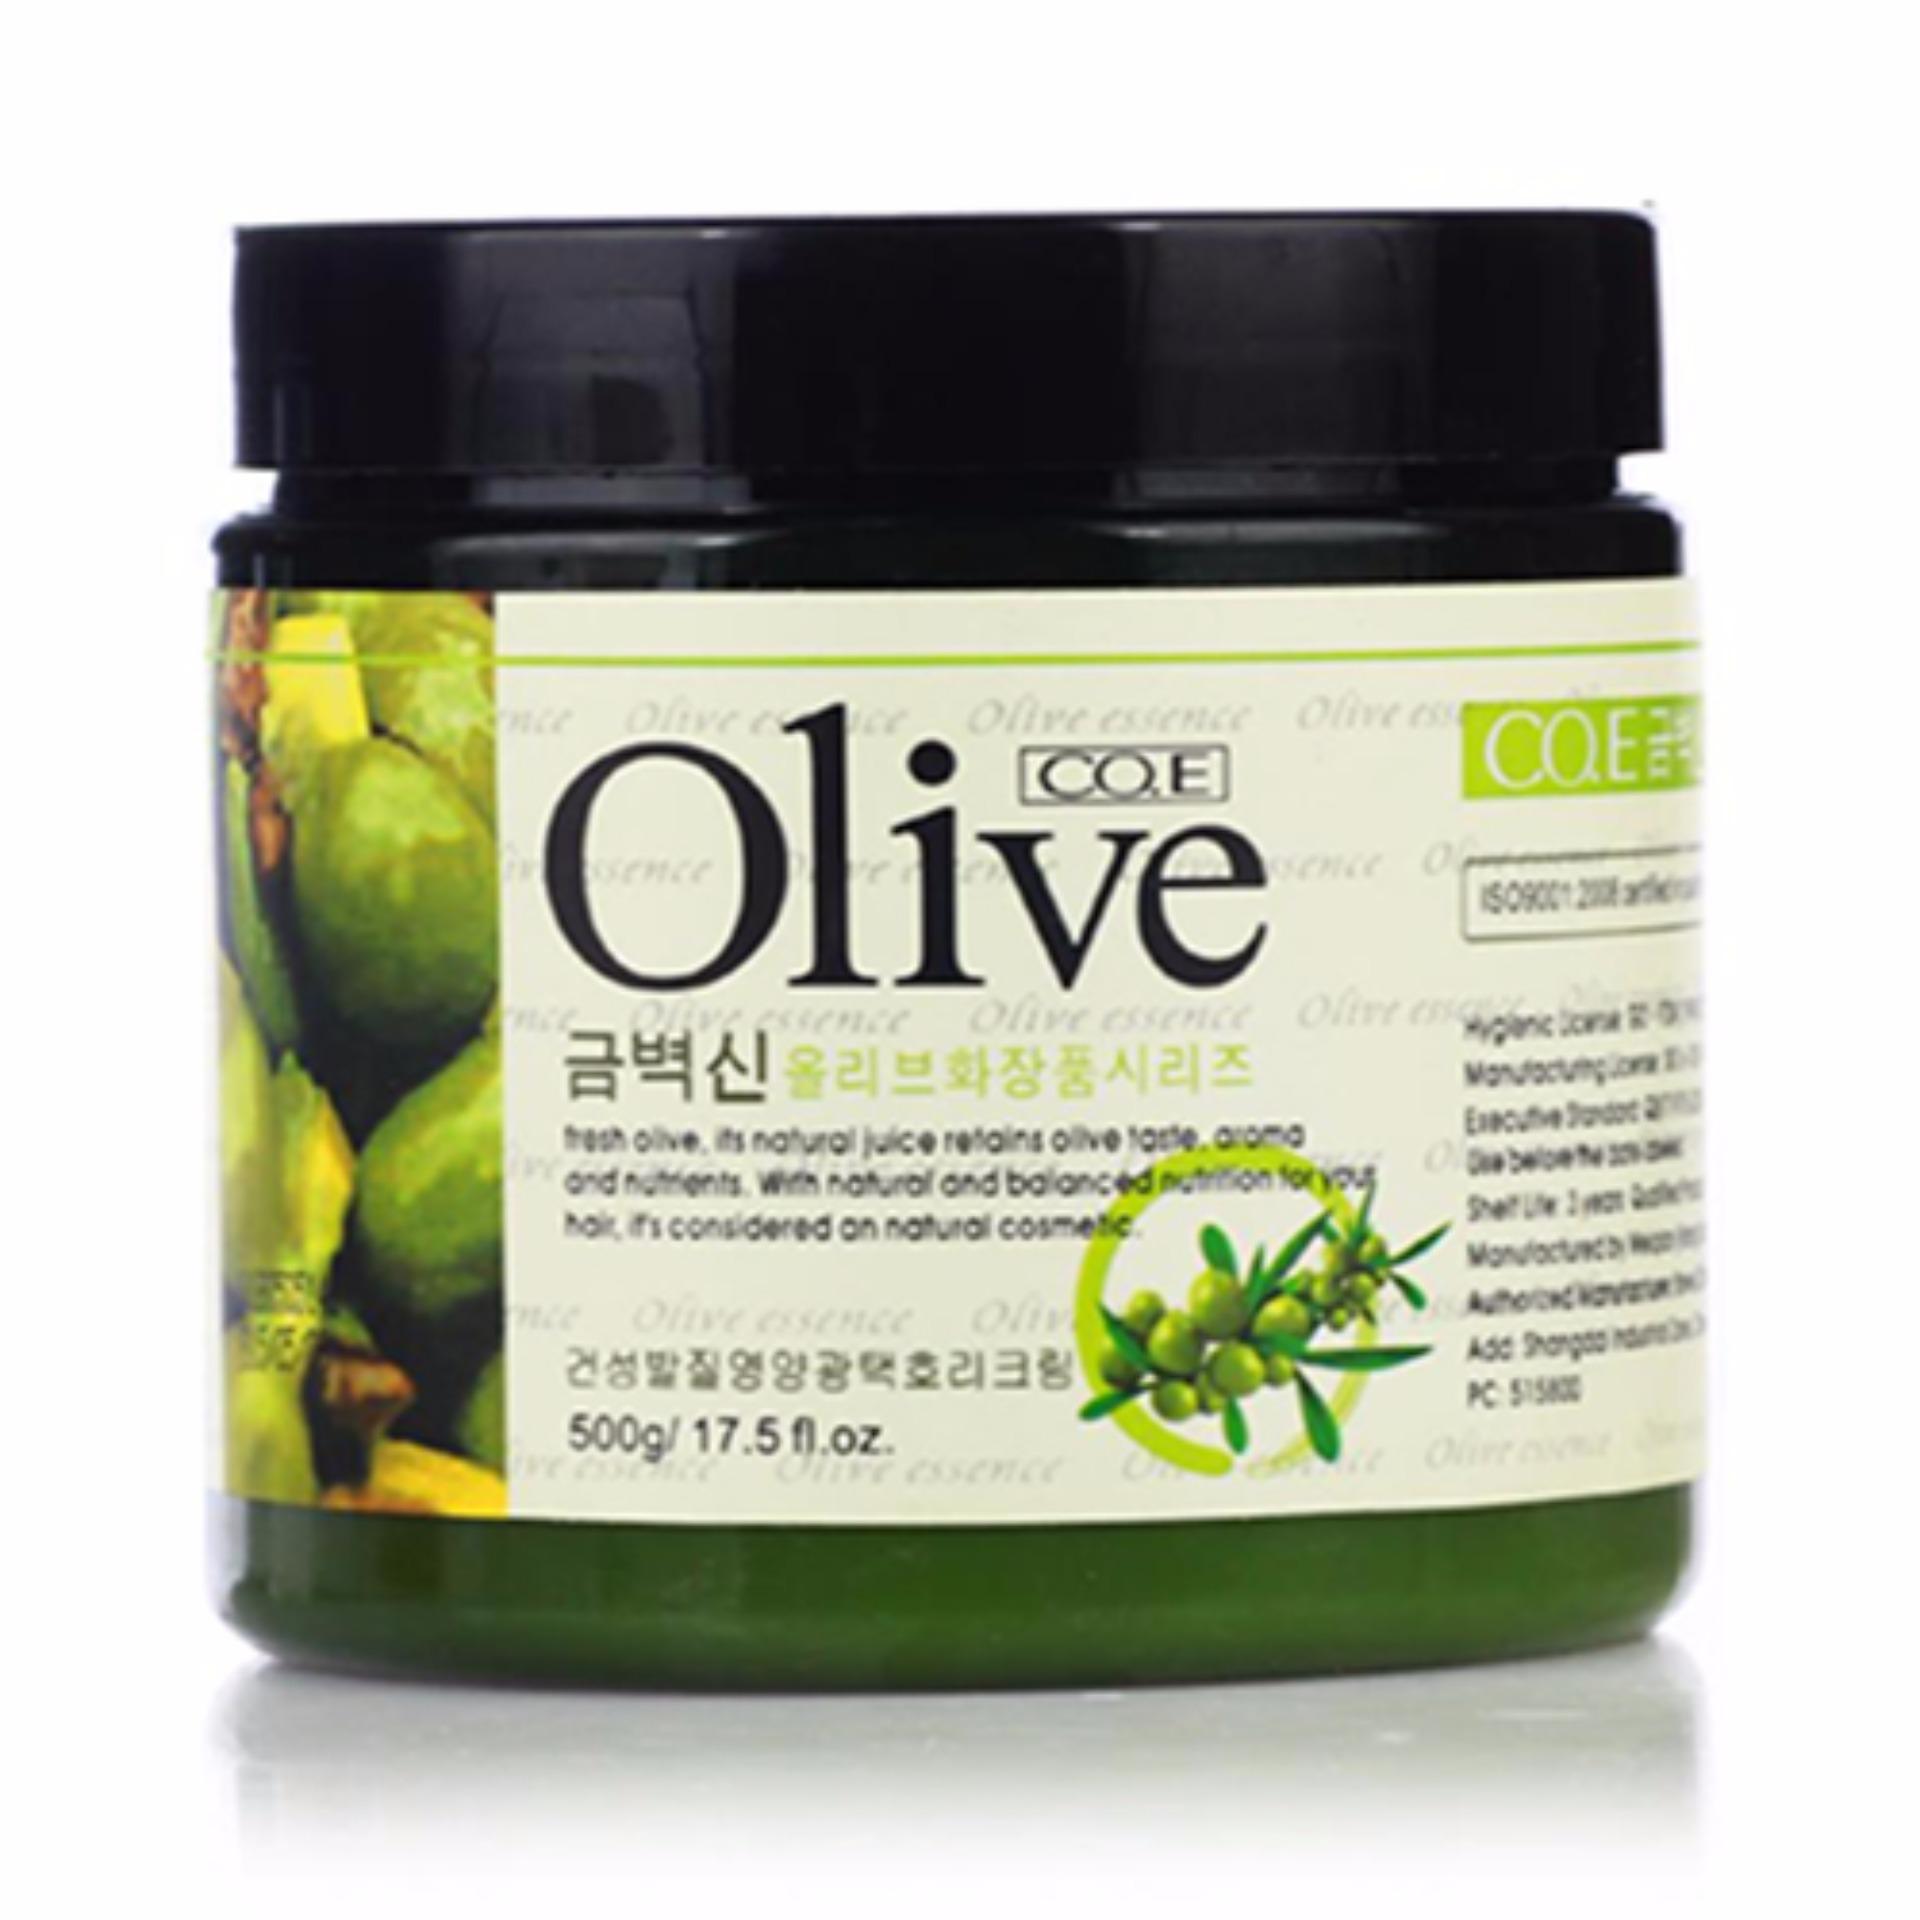 Olive Oil Hair Mask Galhairs 